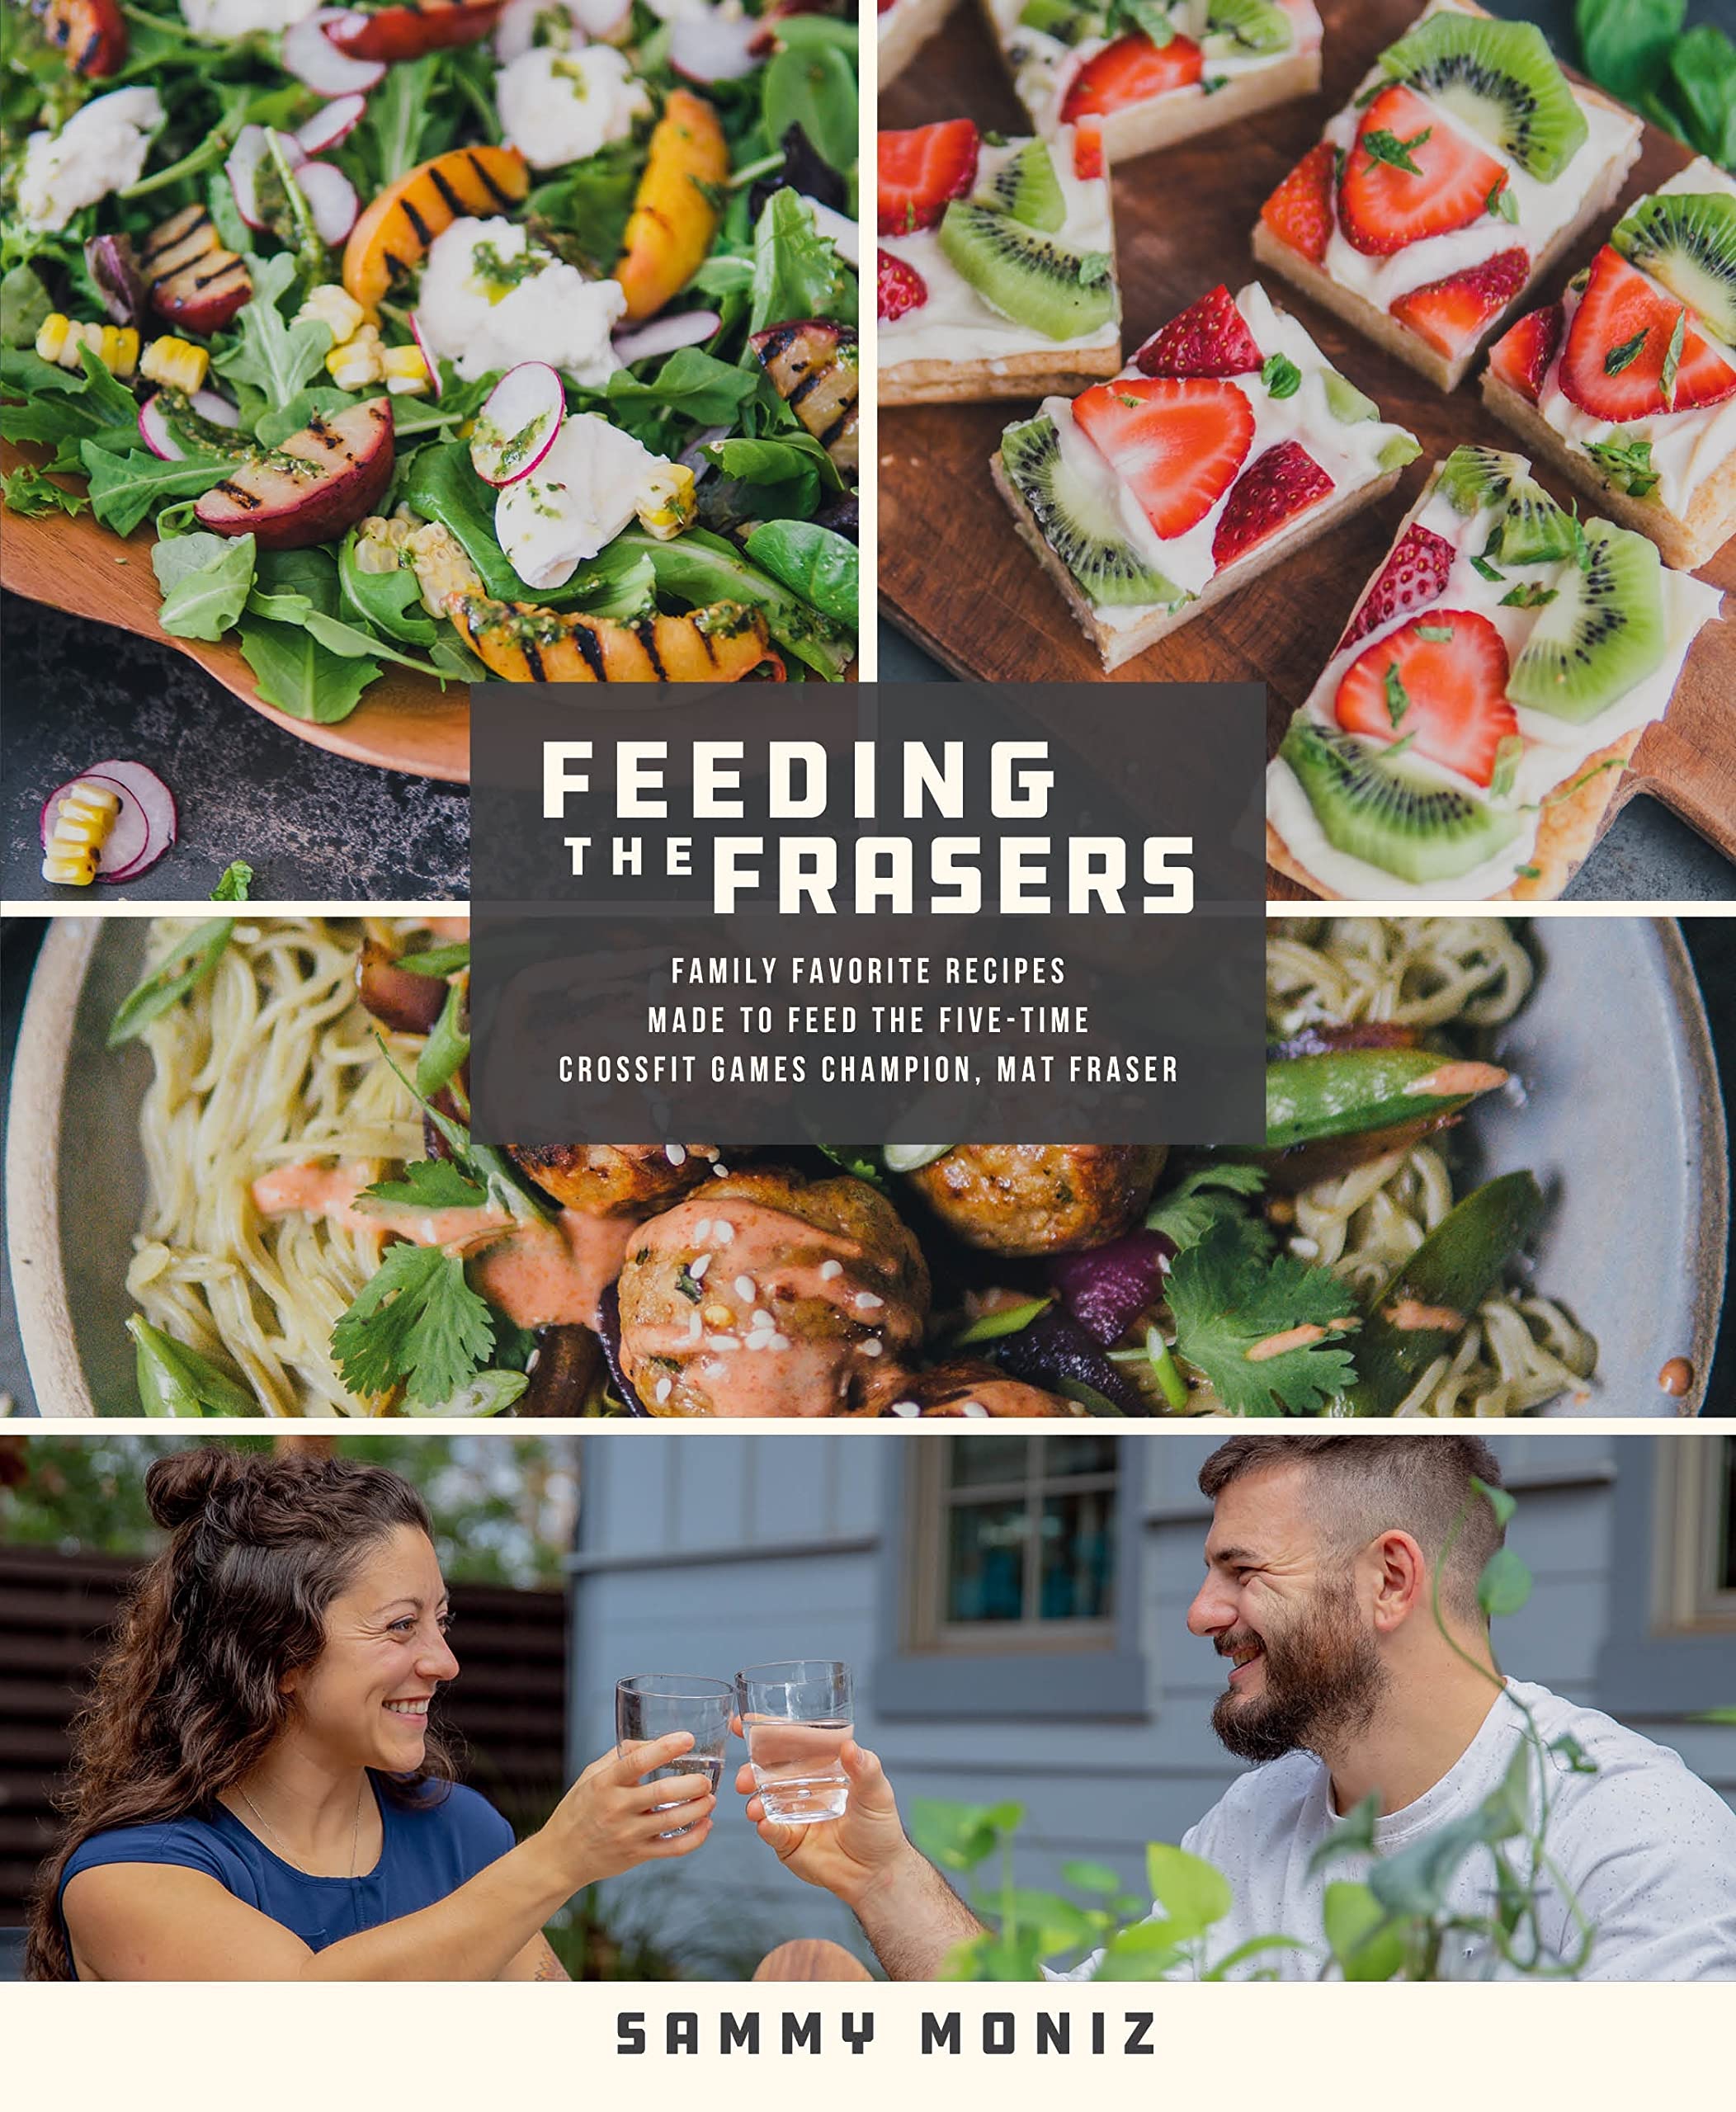 Feeding the Frasers: Family Favorite Recipes Made to Feed the Five-Time Crossfit Games Champion, Mat Fraser - SureShot Books Publishing LLC